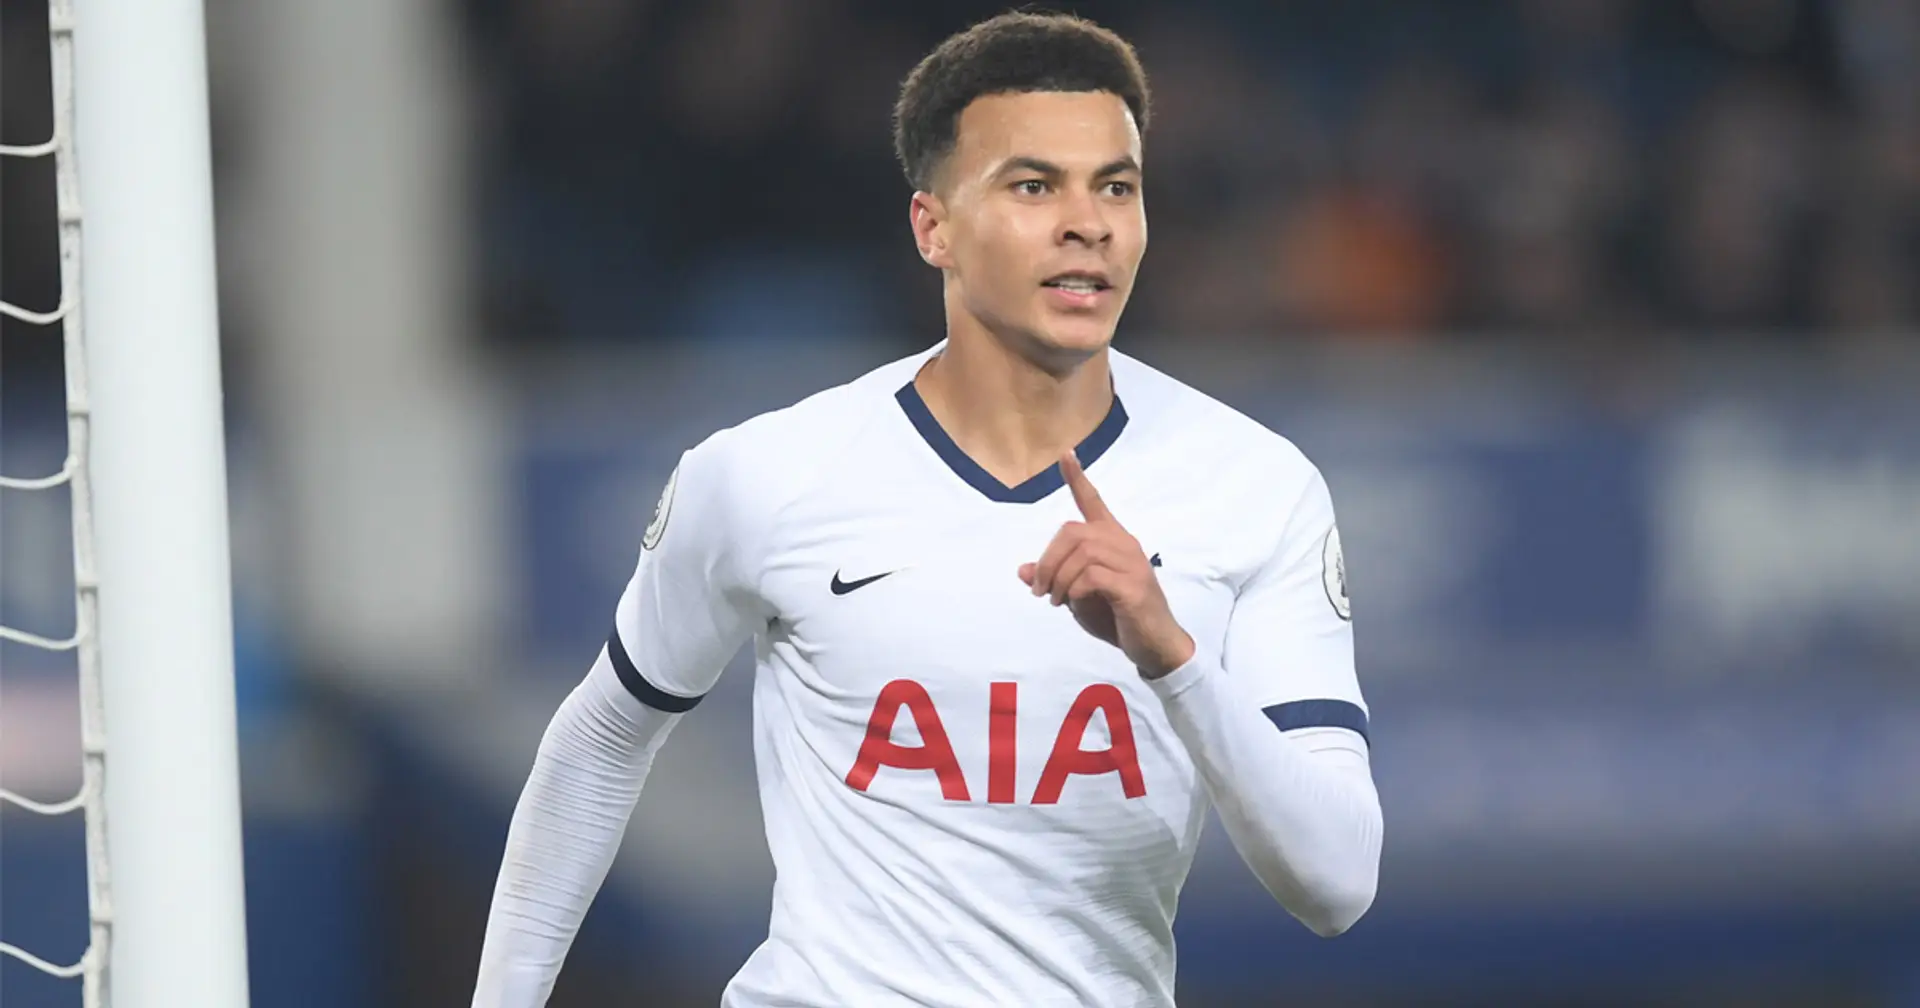 Ray Parlour makes controversial Dele Alli claim - and we take a deep dive to verify it